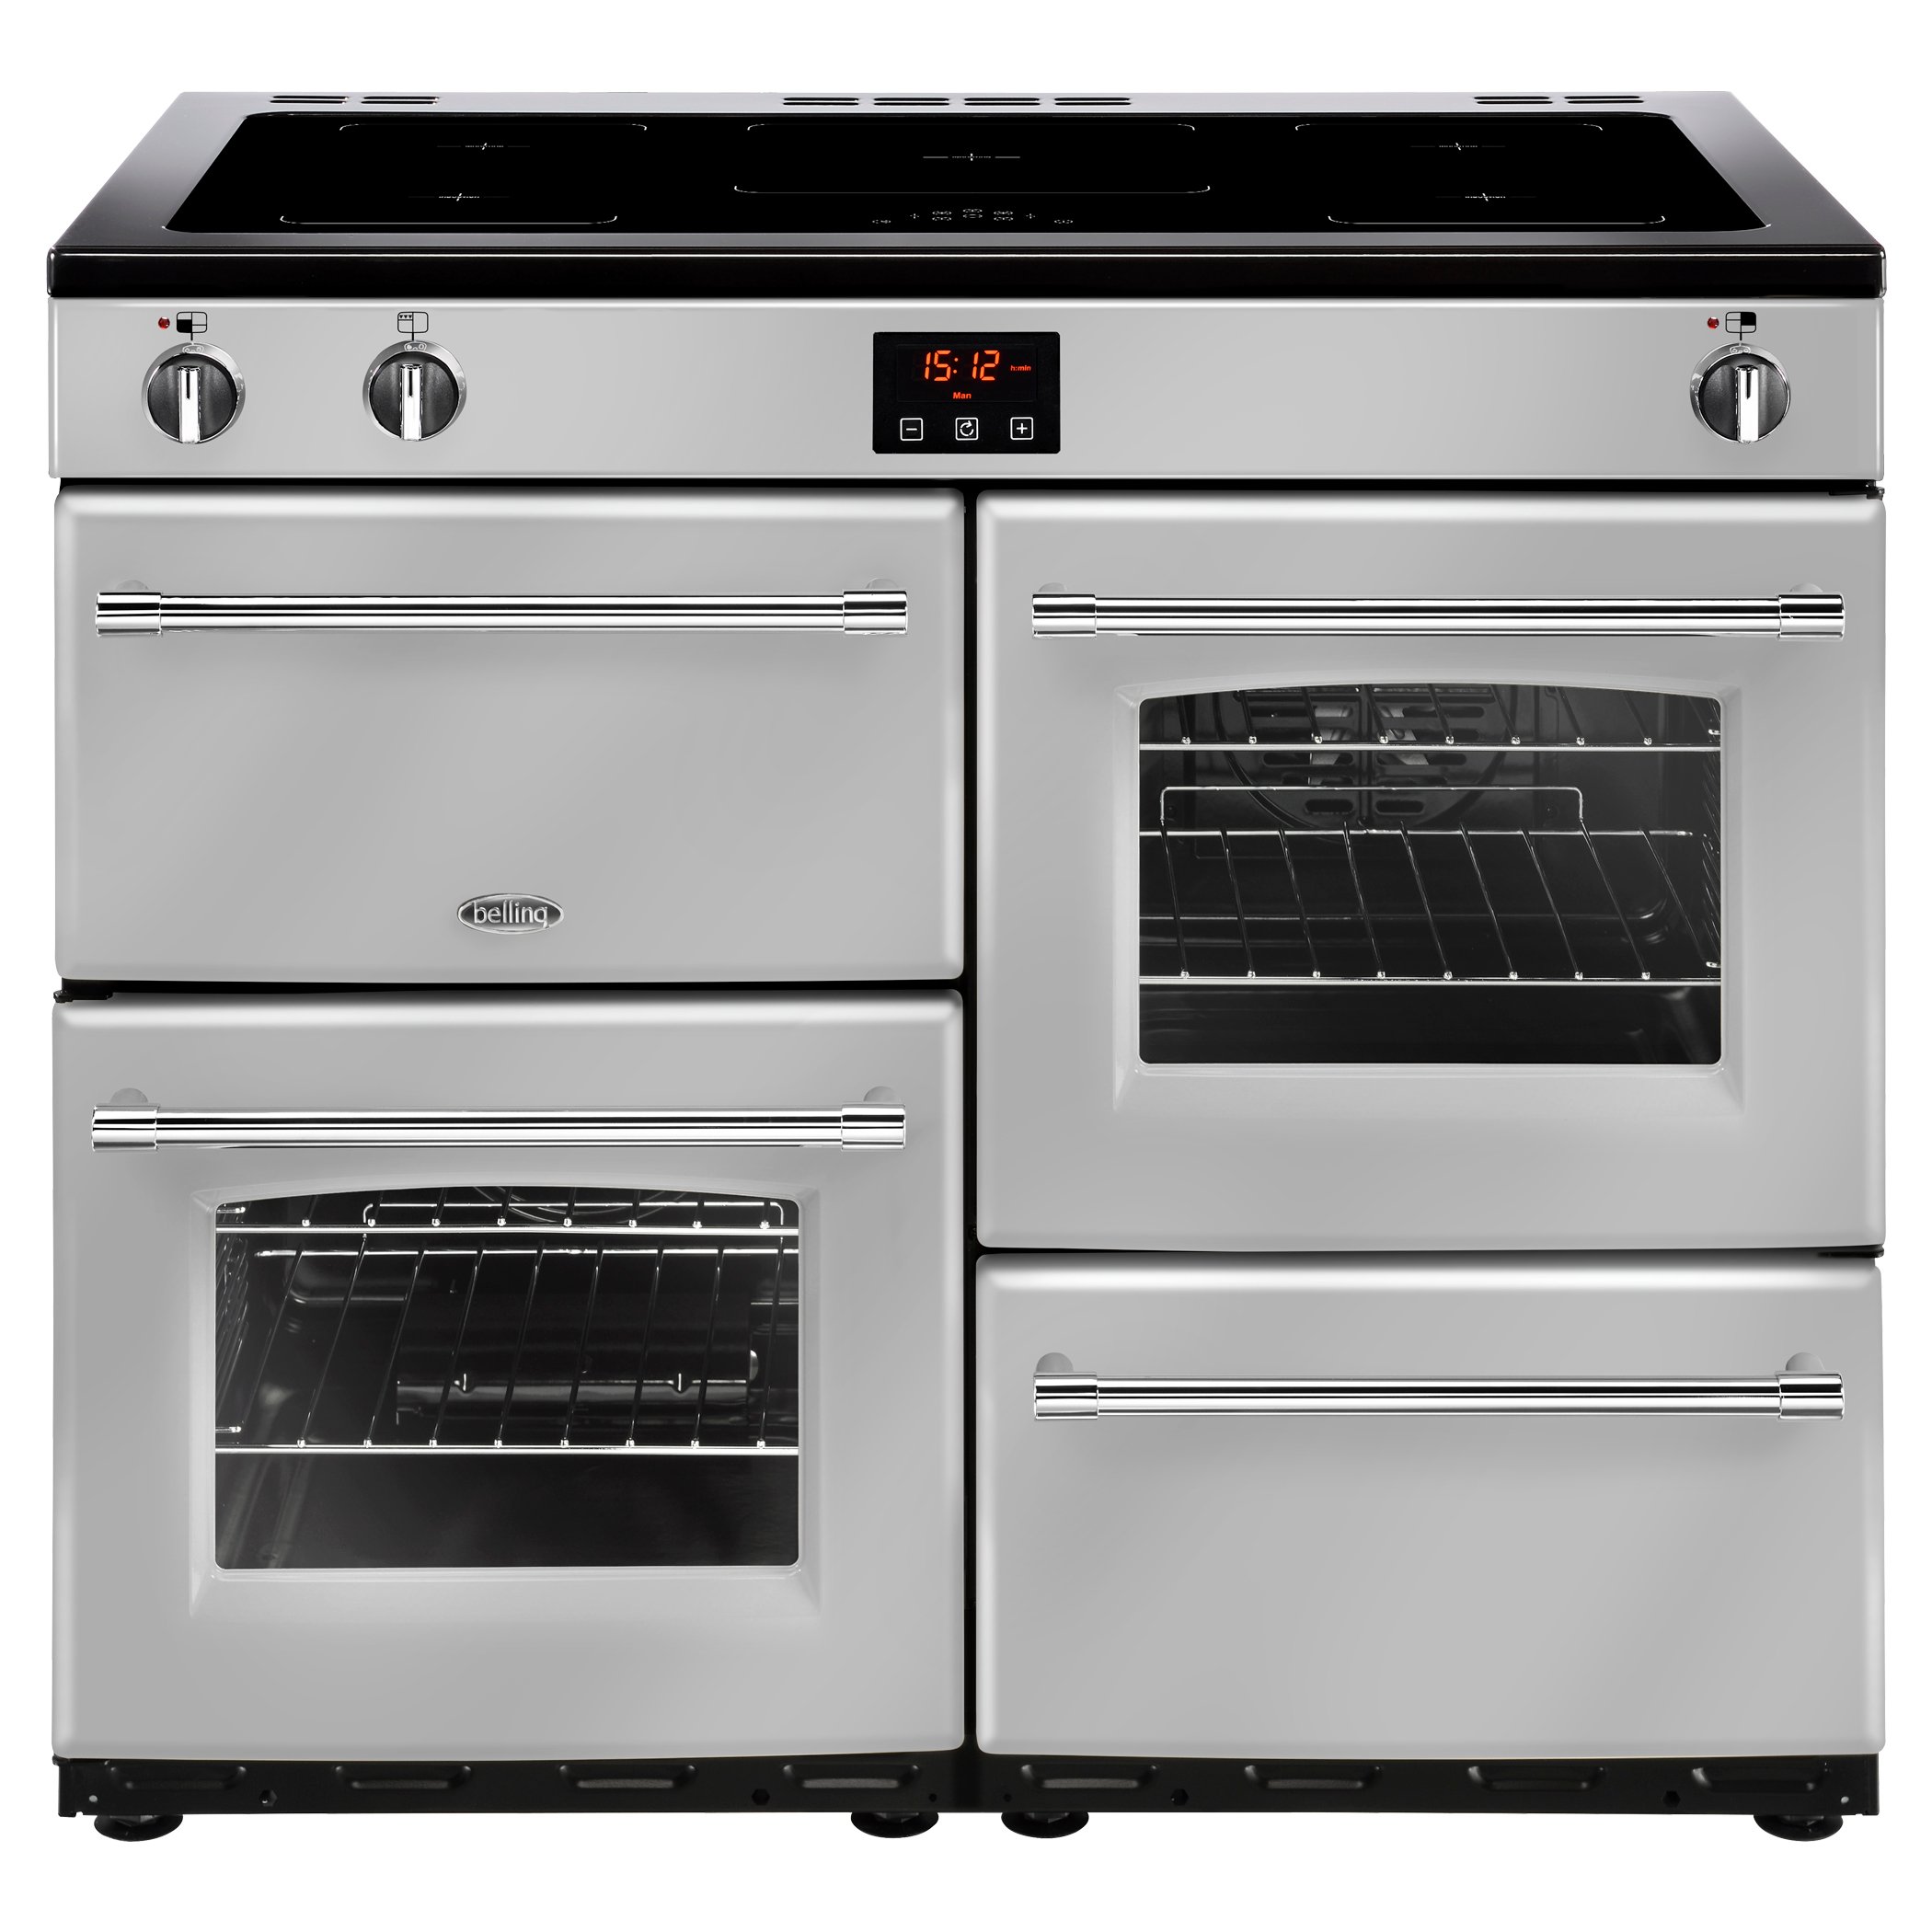 100cm electric range cooker with induction hotplate and smart Link+ technology, Maxi-Clock and easy clean enamel. Requires 32A connection.